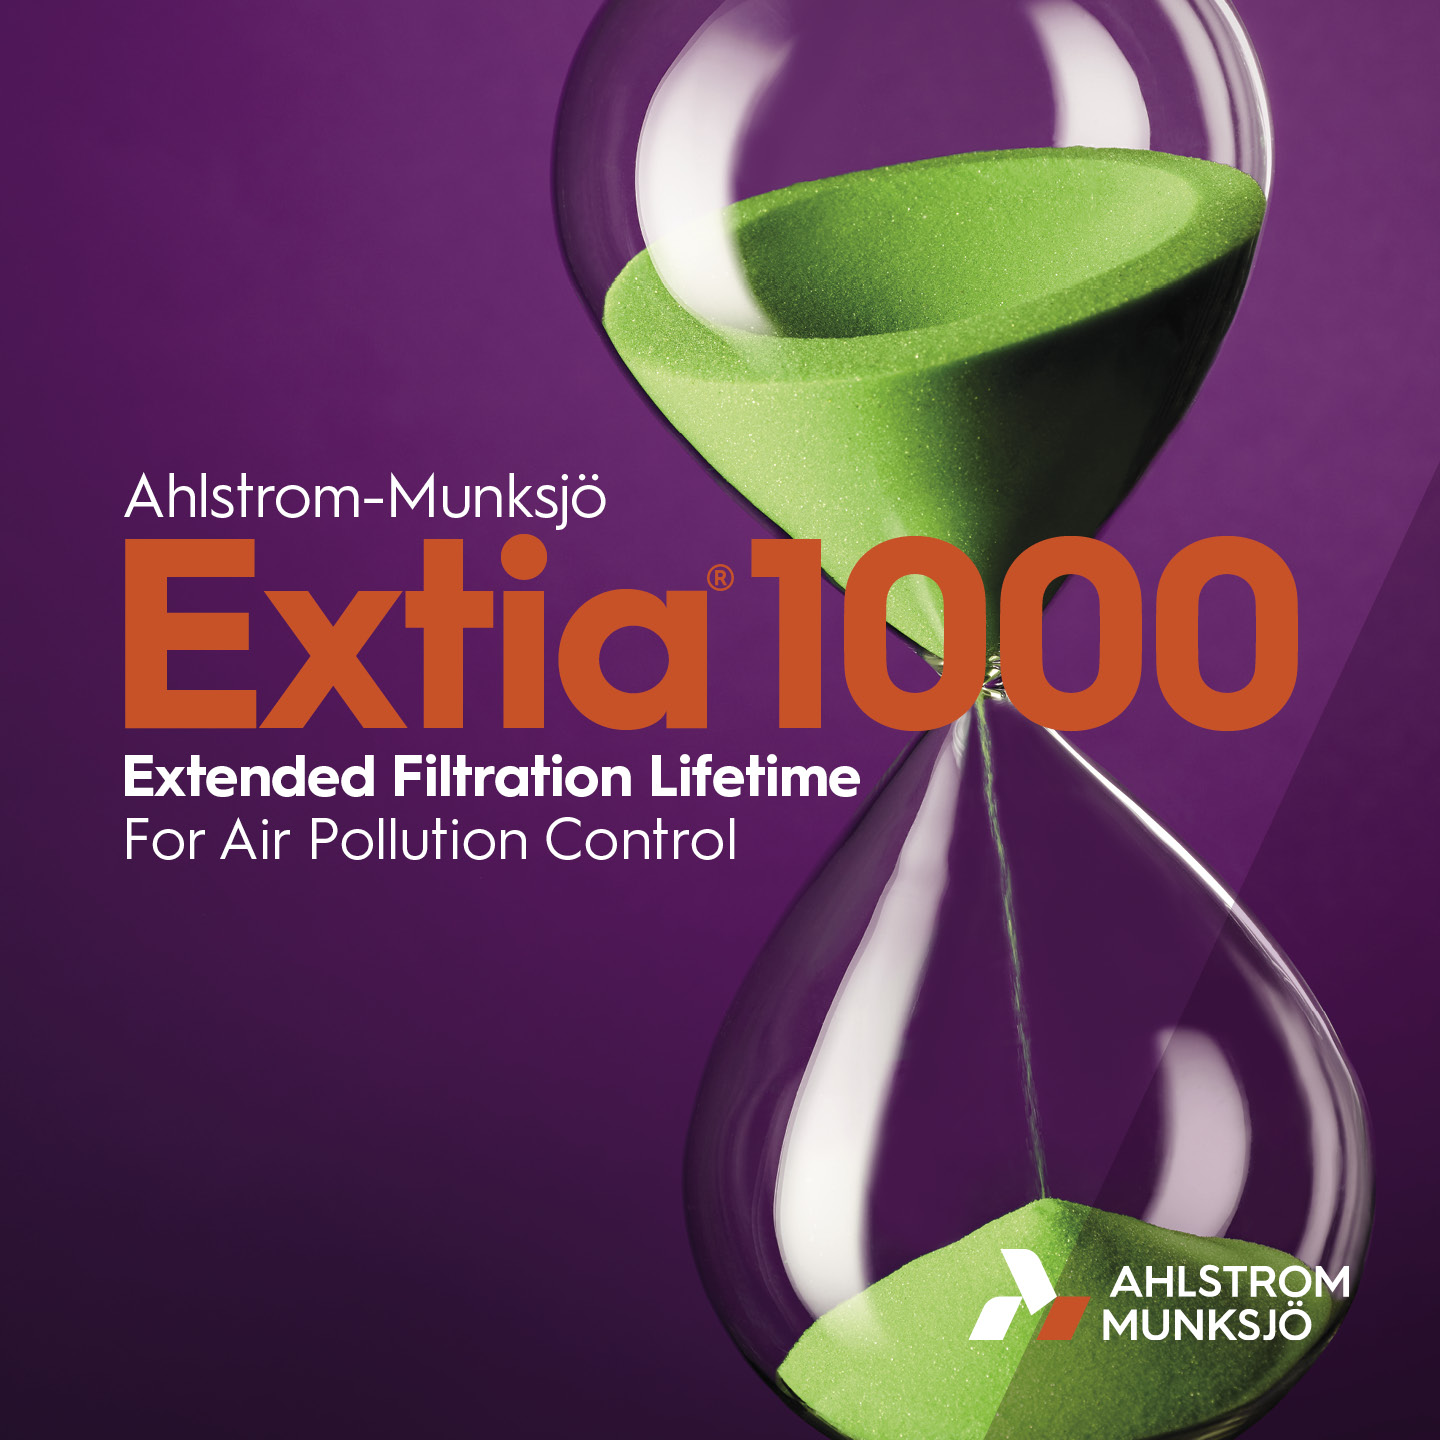 The Extia is designed to extend filtration lifetime by more than 40%.